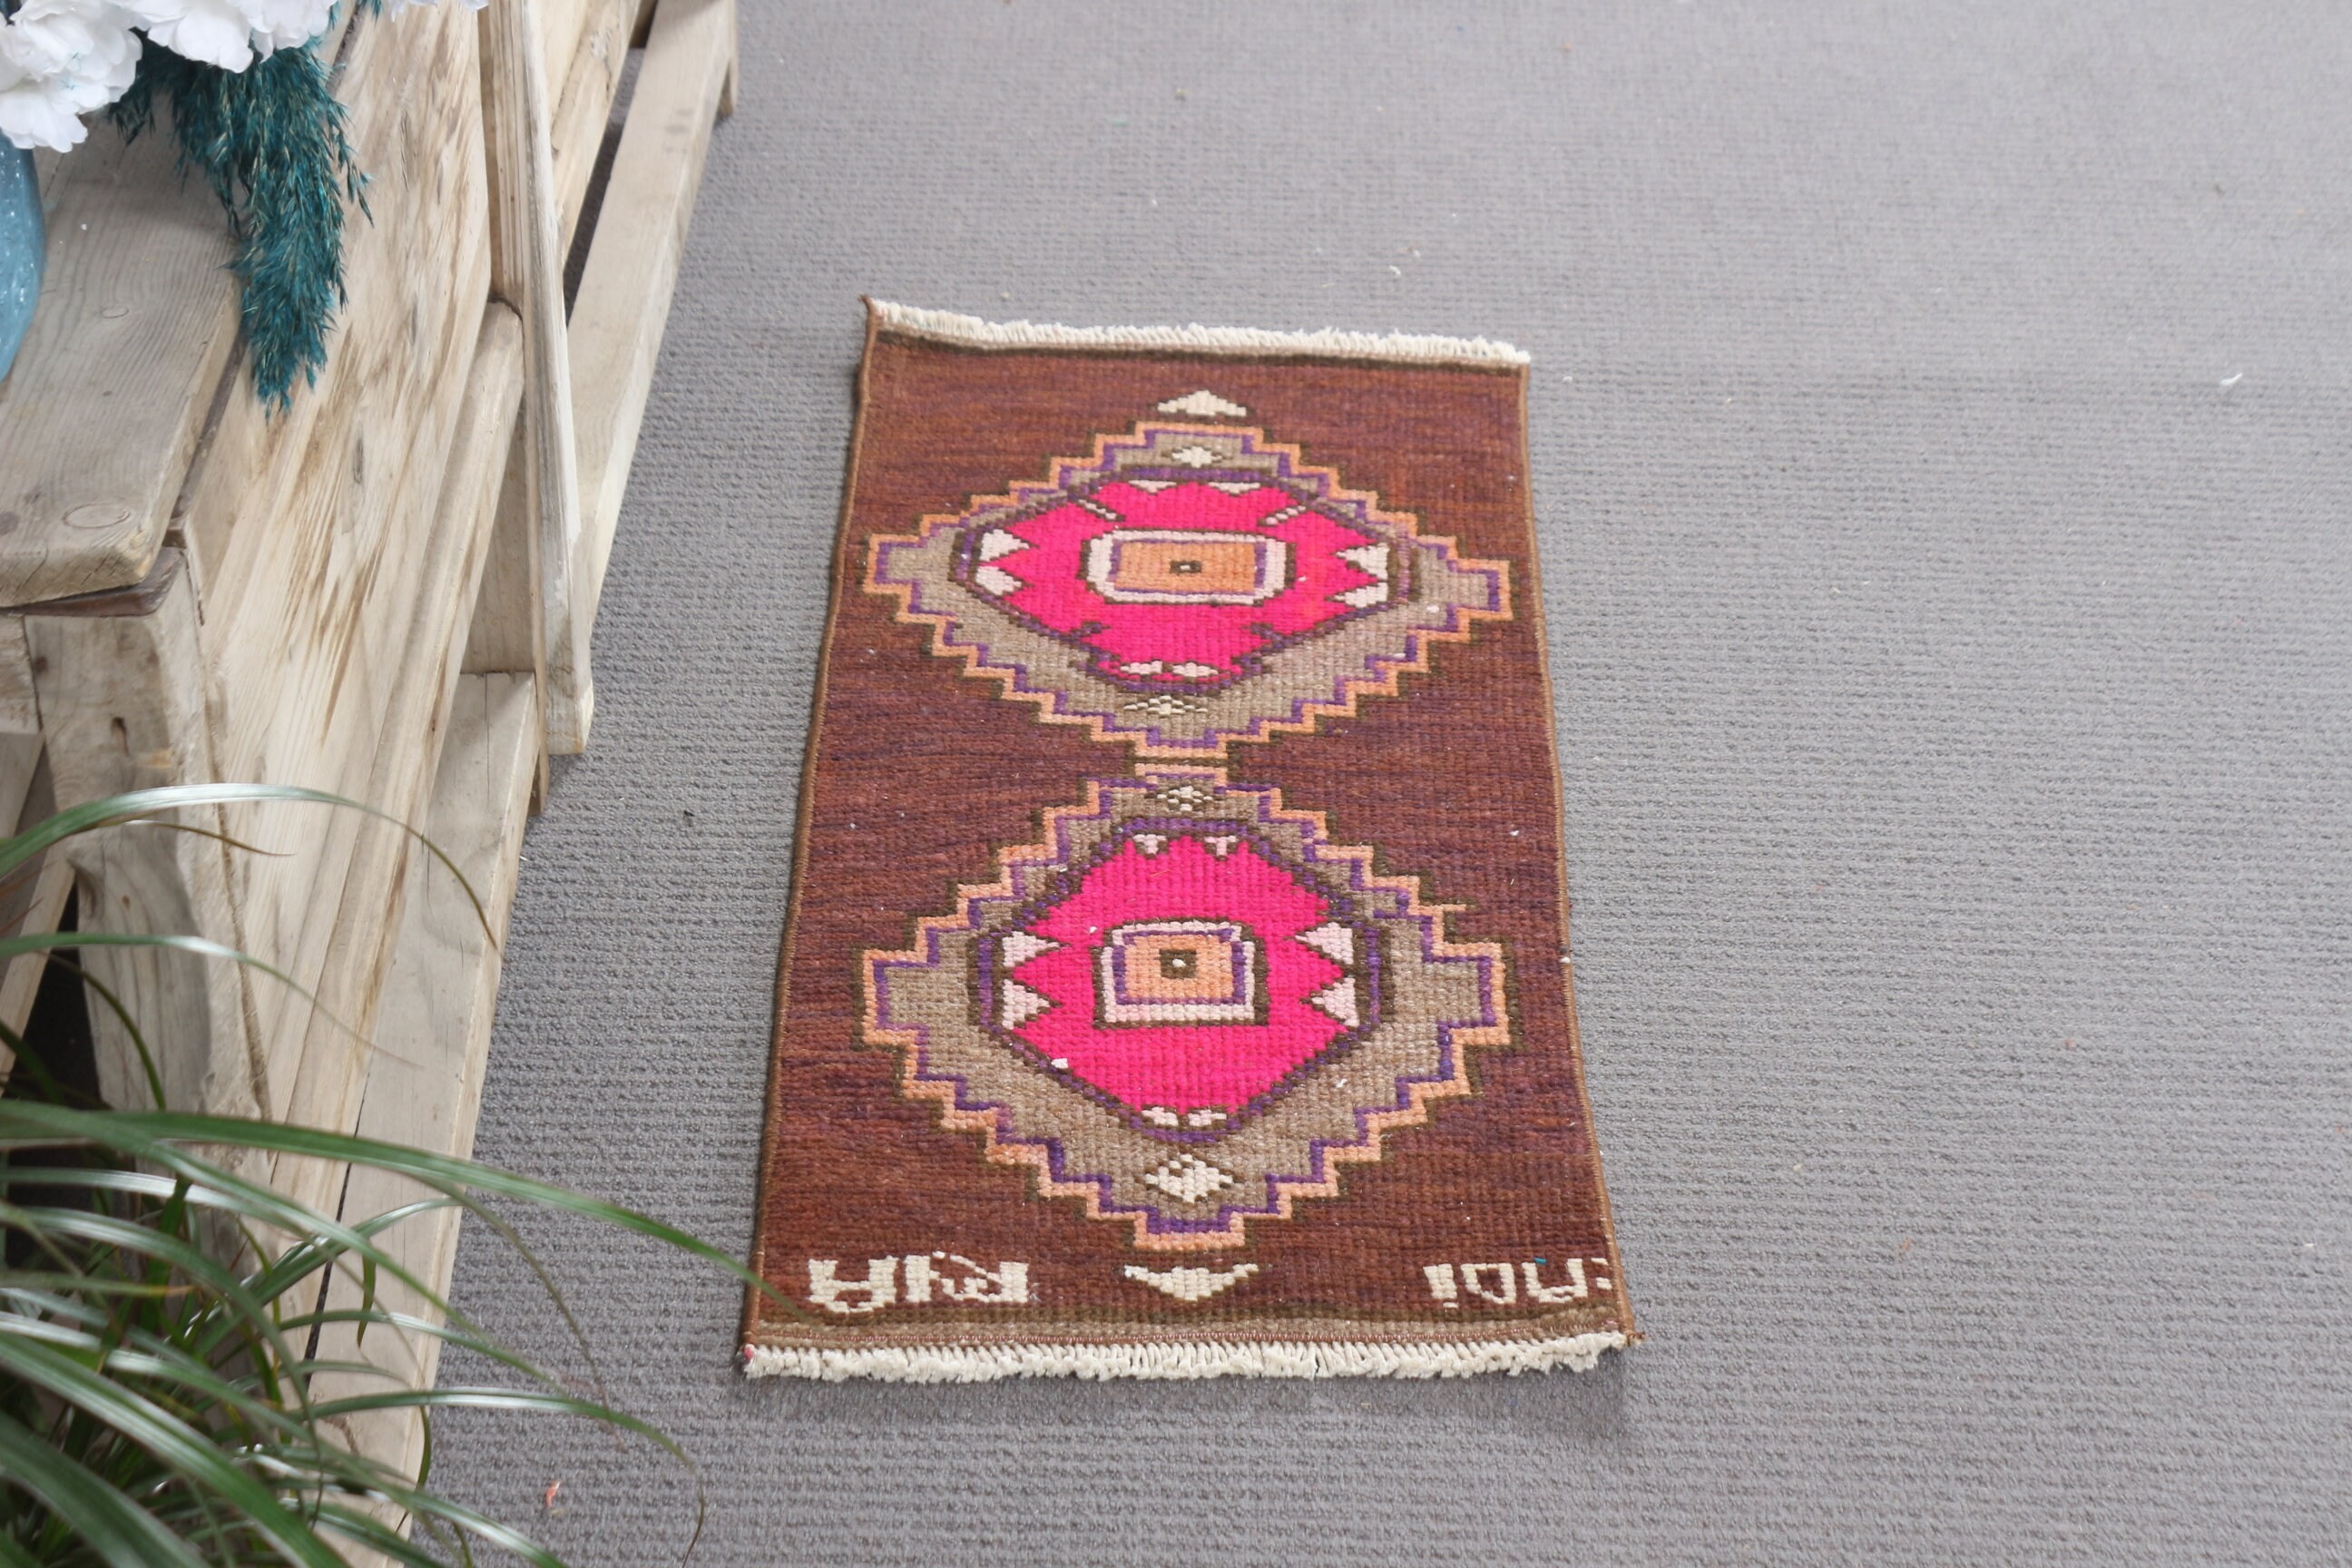 Kitchen Rugs, Bath Rugs, Turkish Rugs, Vintage Rug, Nursery Rugs, Rugs for Car Mat, Brown  1.3x2.9 ft Small Rug, Oushak Rugs